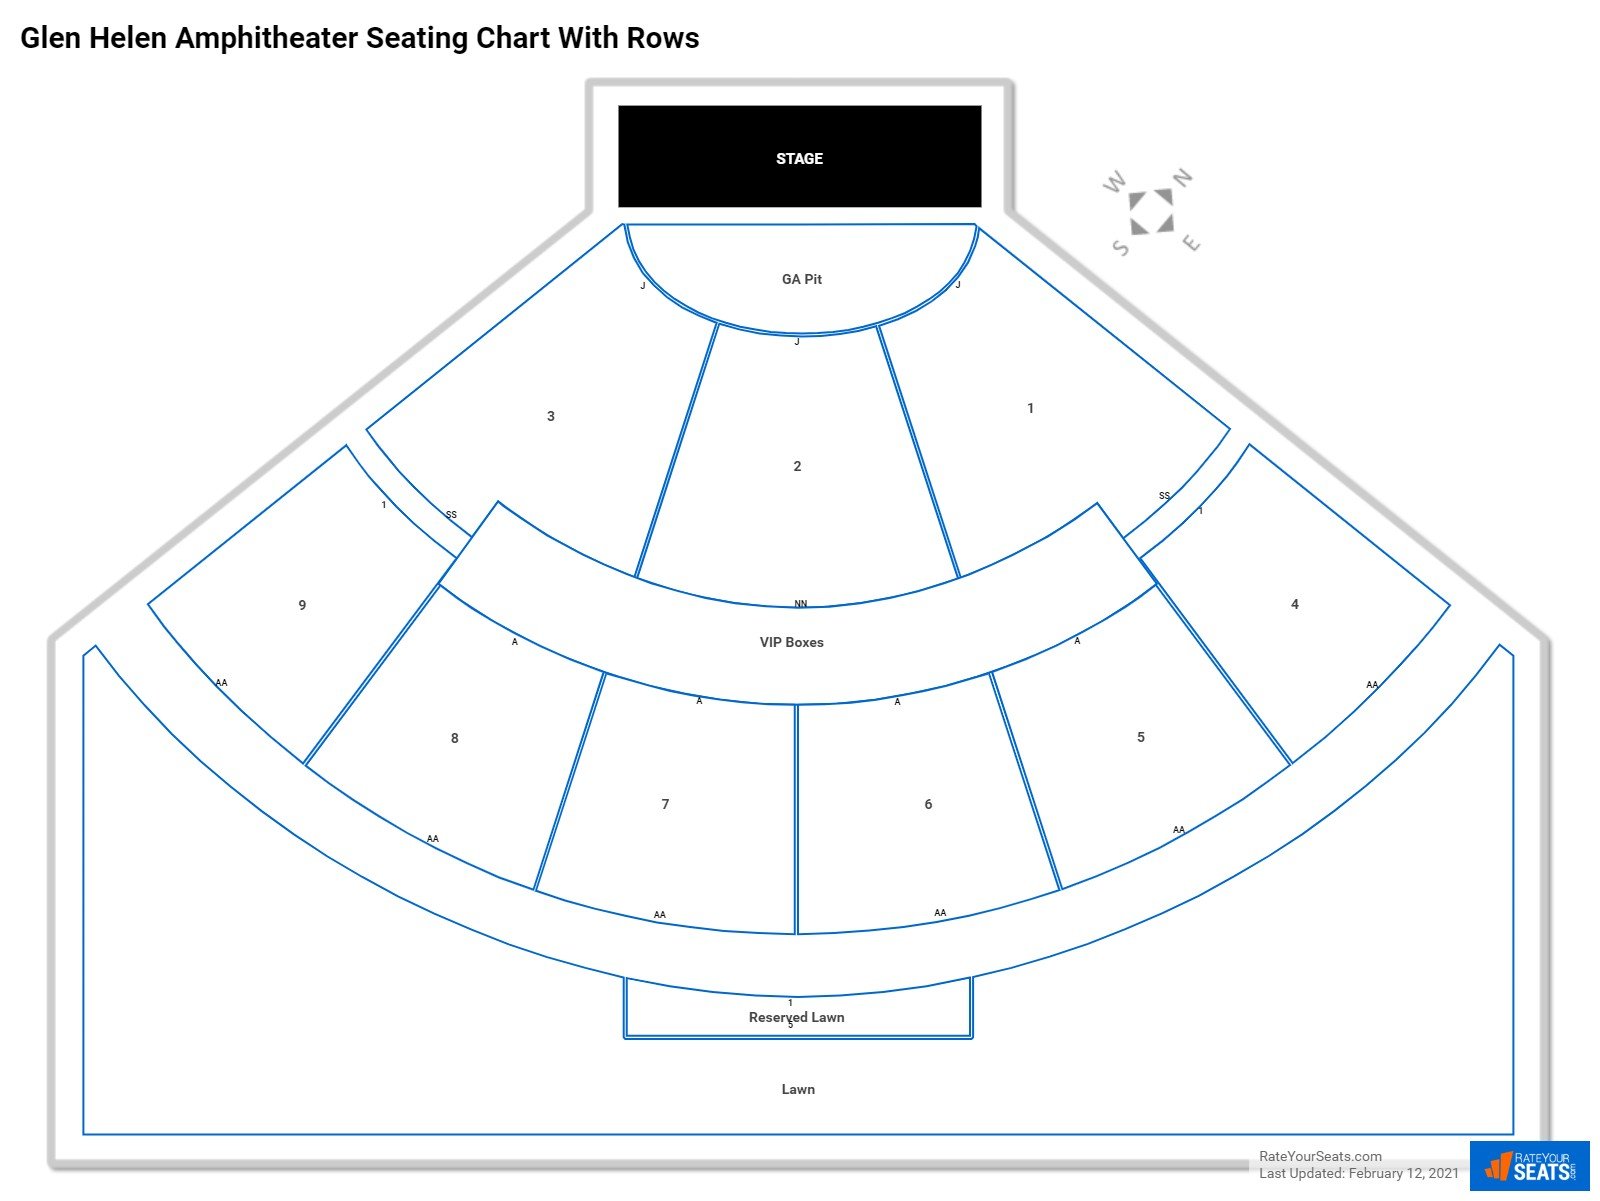 Glen Helen Amphitheater seating chart with row numbers